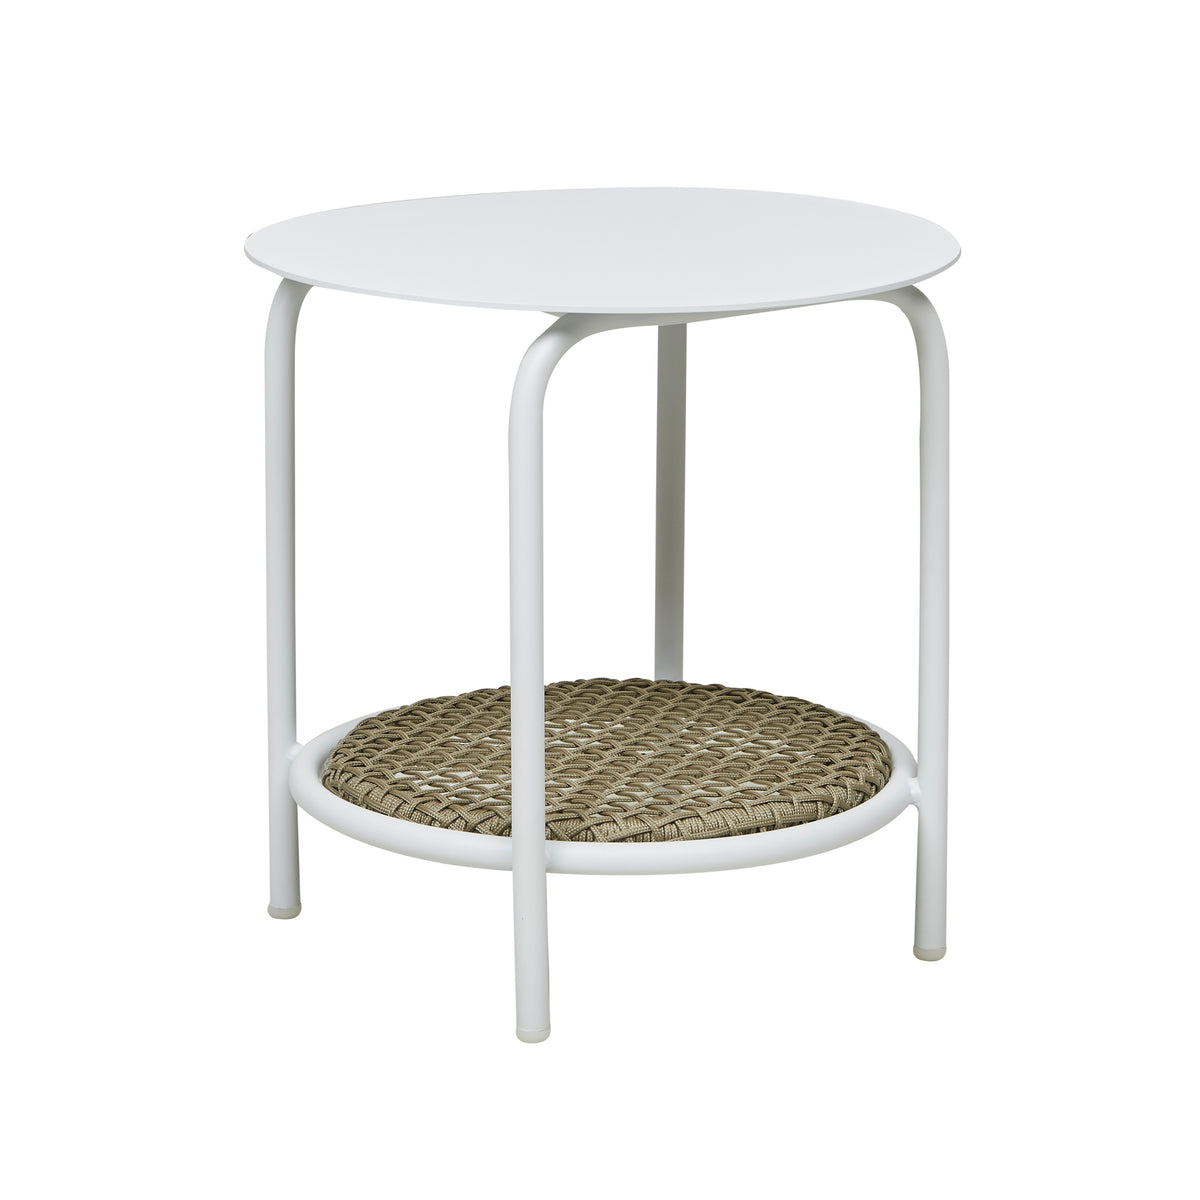 Aperto Rounded Side Table